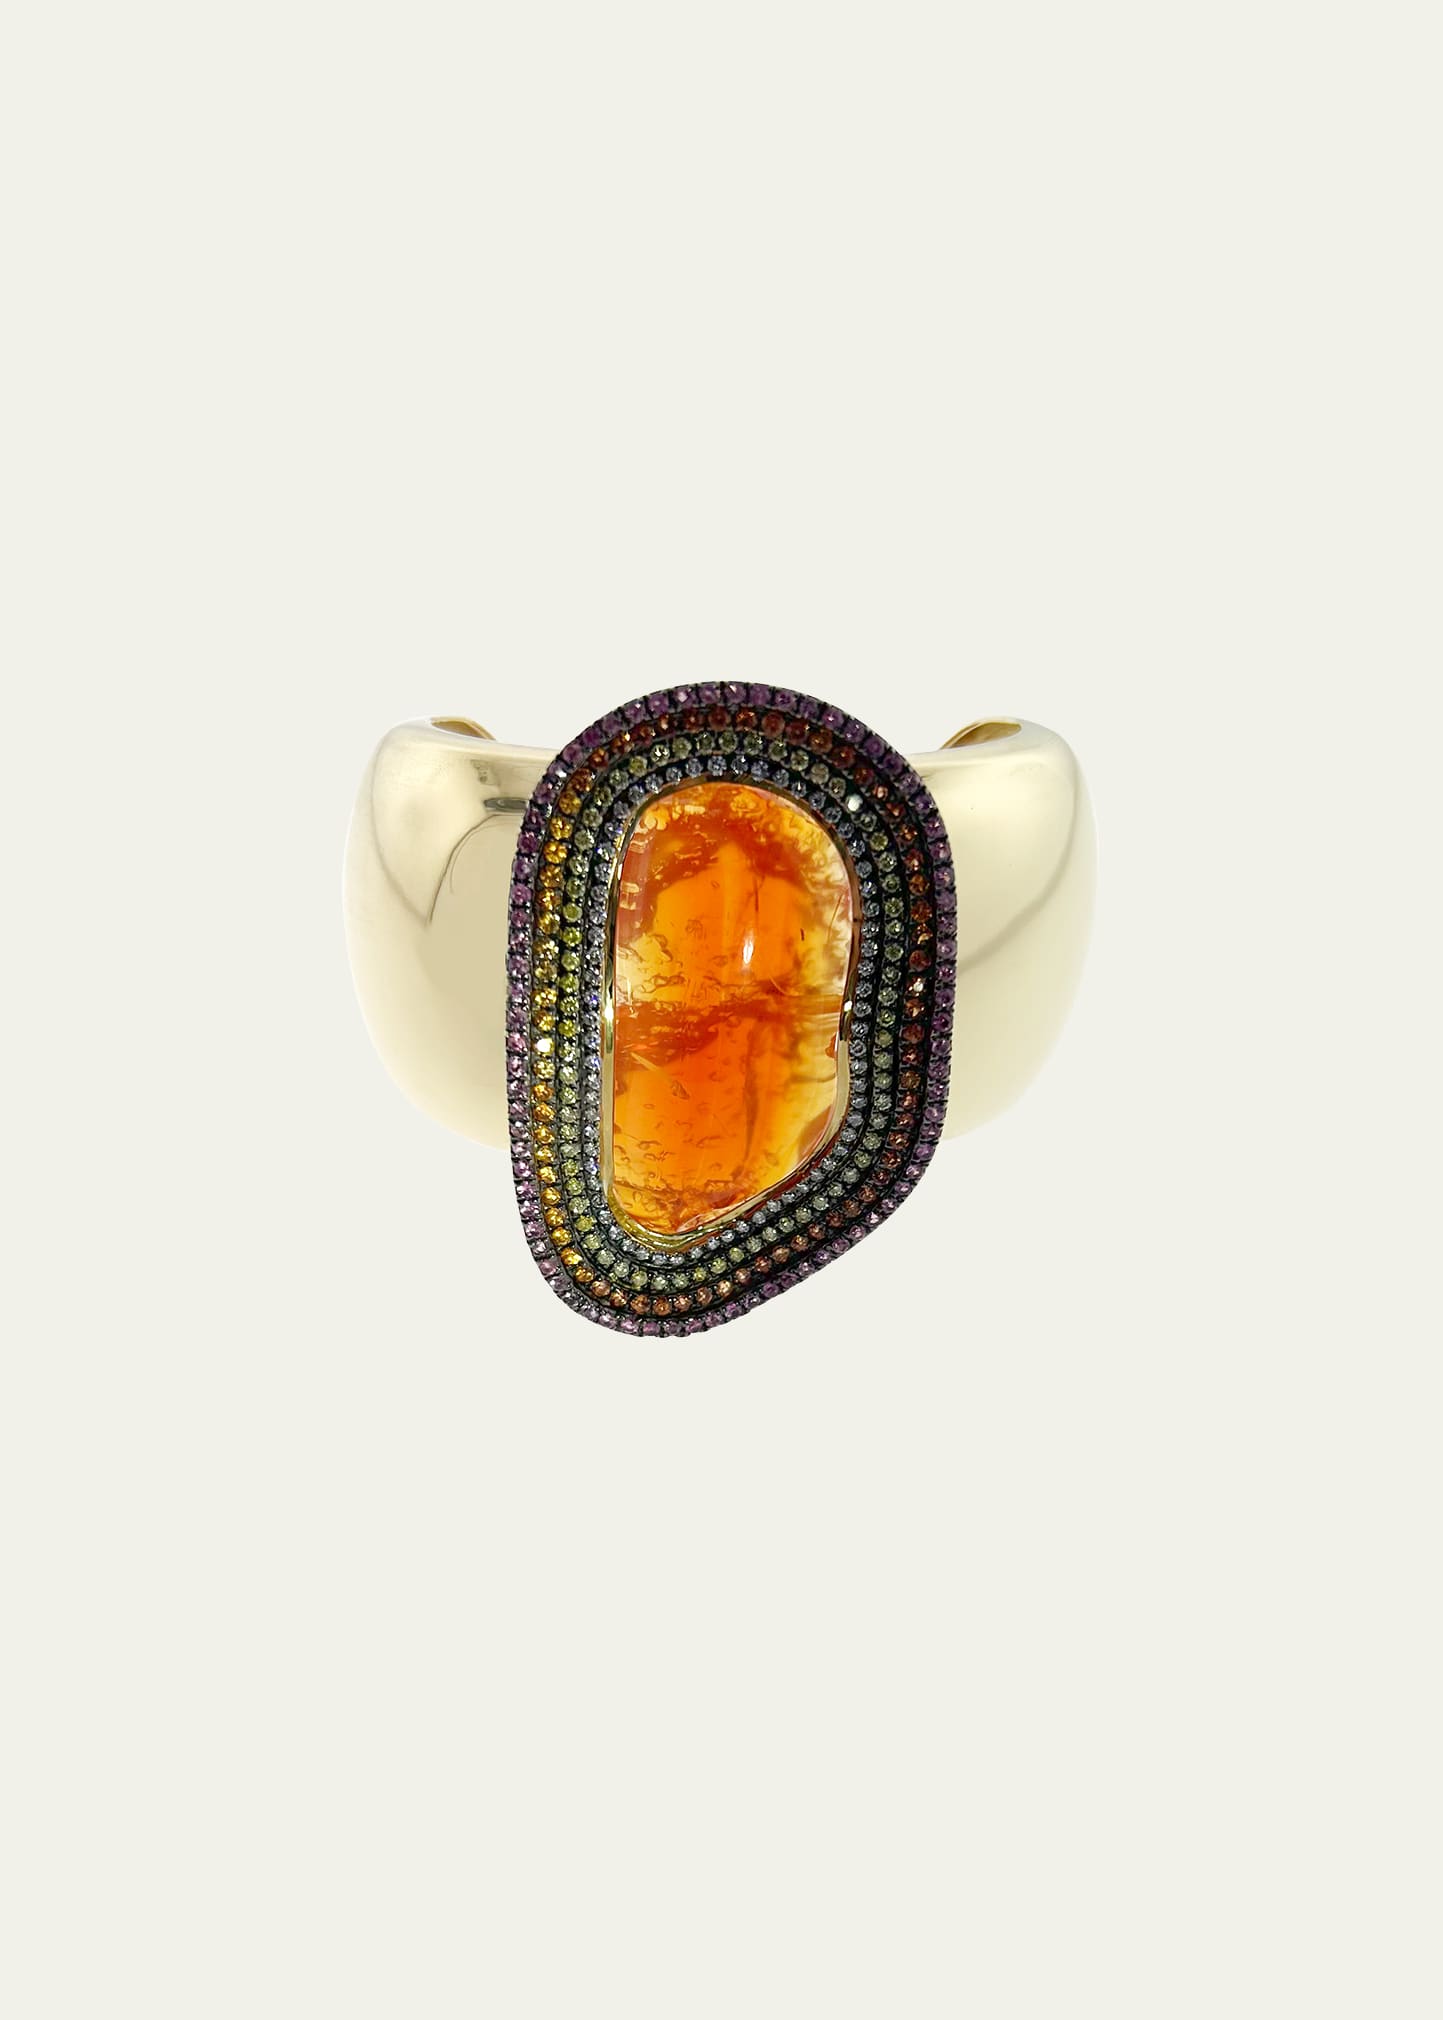 Mexican Fire Opal Bracelet with Sapphires and Diamonds